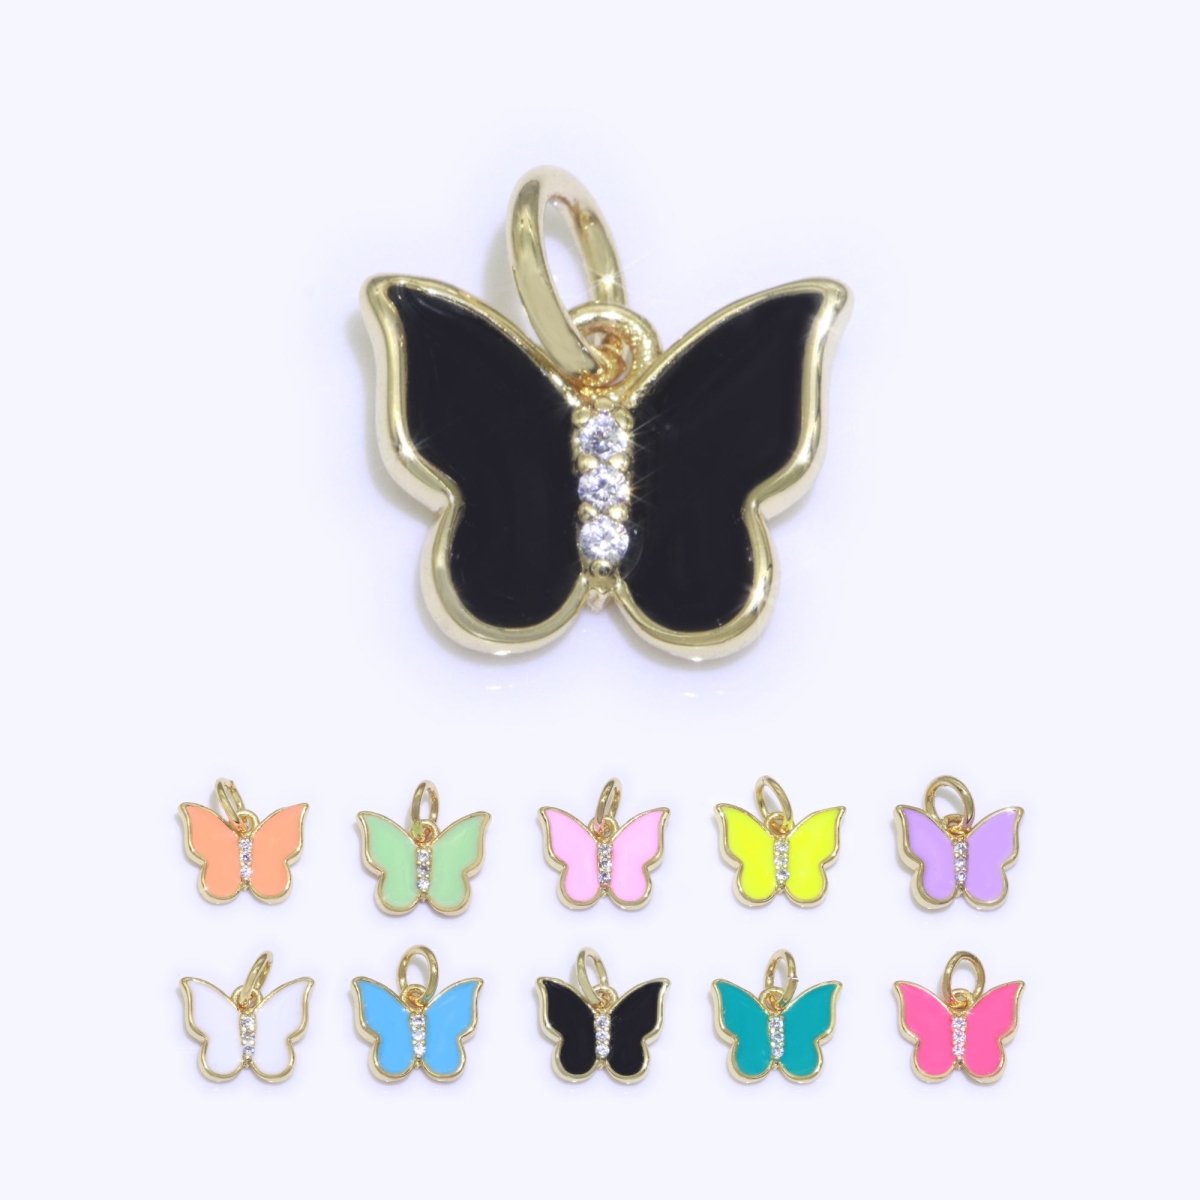 Enamel Color Butterfly Charm, Dainty Gold Monarch Charm for Necklace, Bracelet, Earring Charm Mariposa Jewelry Making M-450 - M-459 - DLUXCA